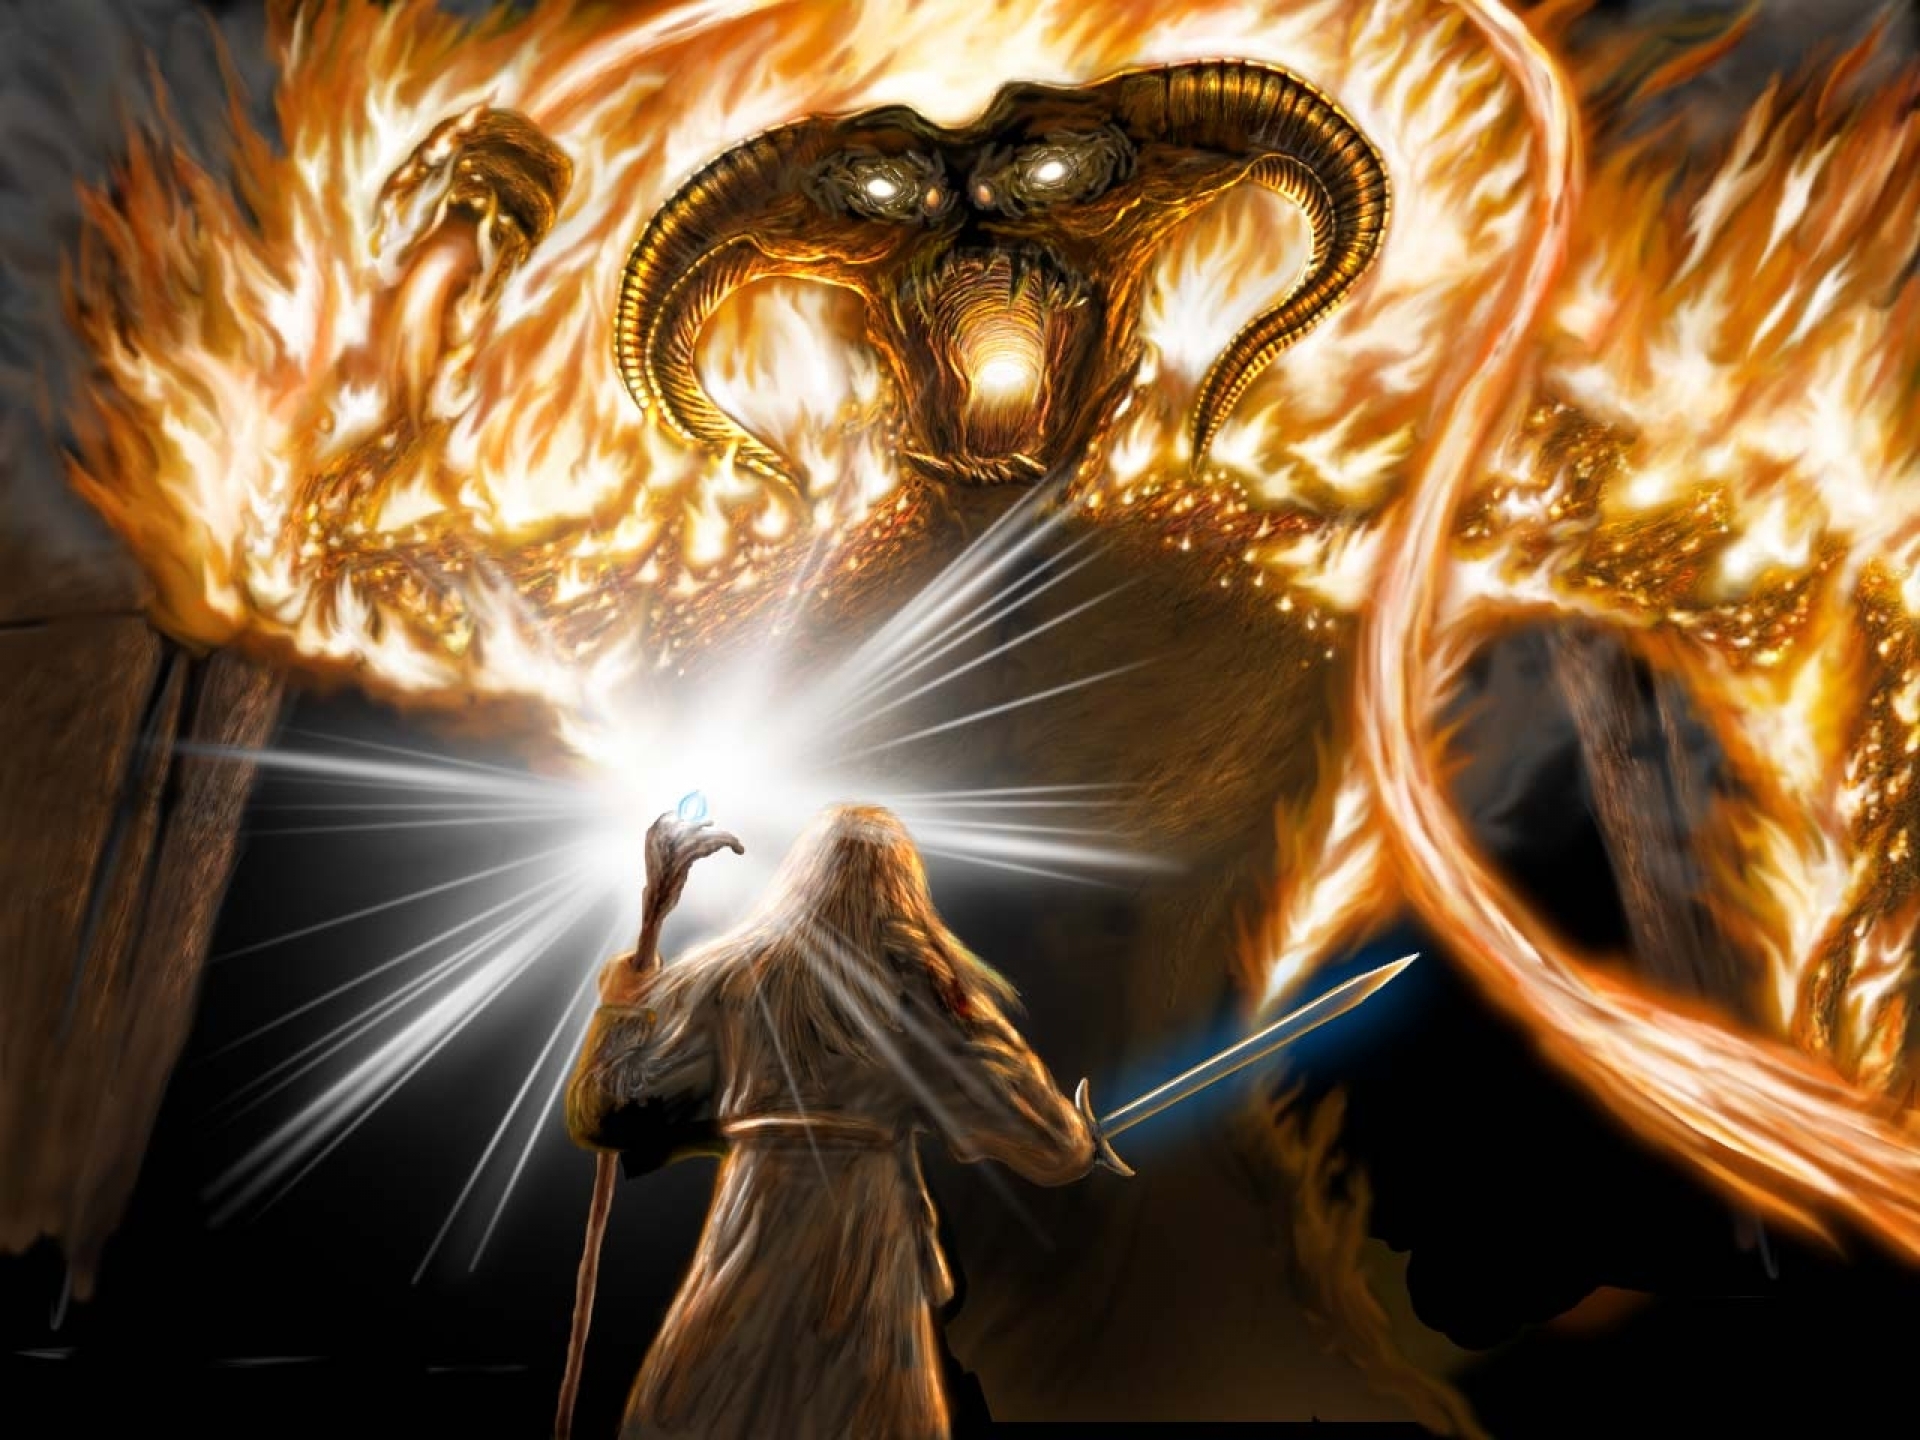 Balrog Lord Of The Rings Gandalf 1920x1440